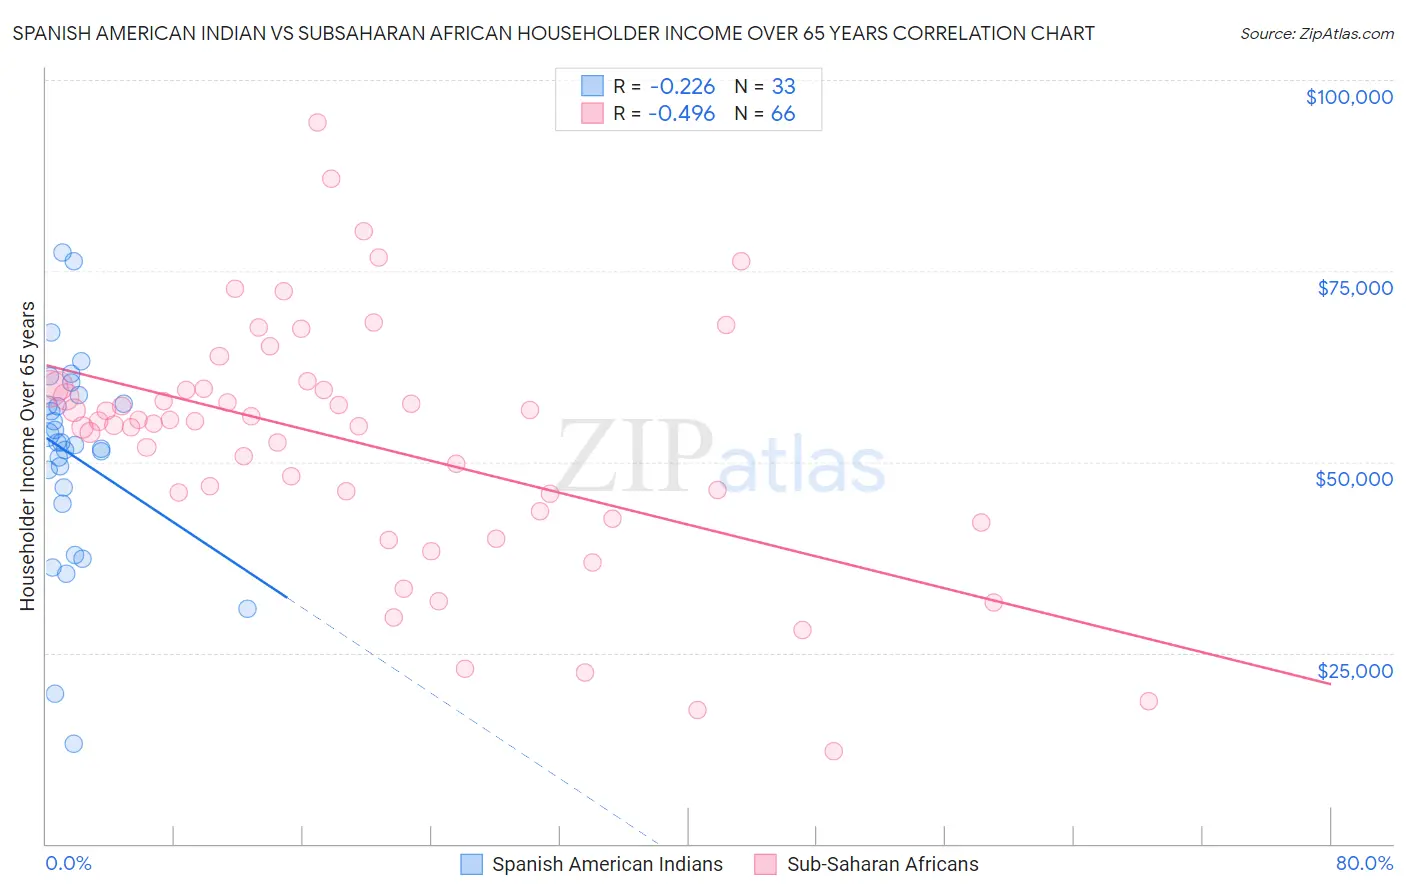 Spanish American Indian vs Subsaharan African Householder Income Over 65 years